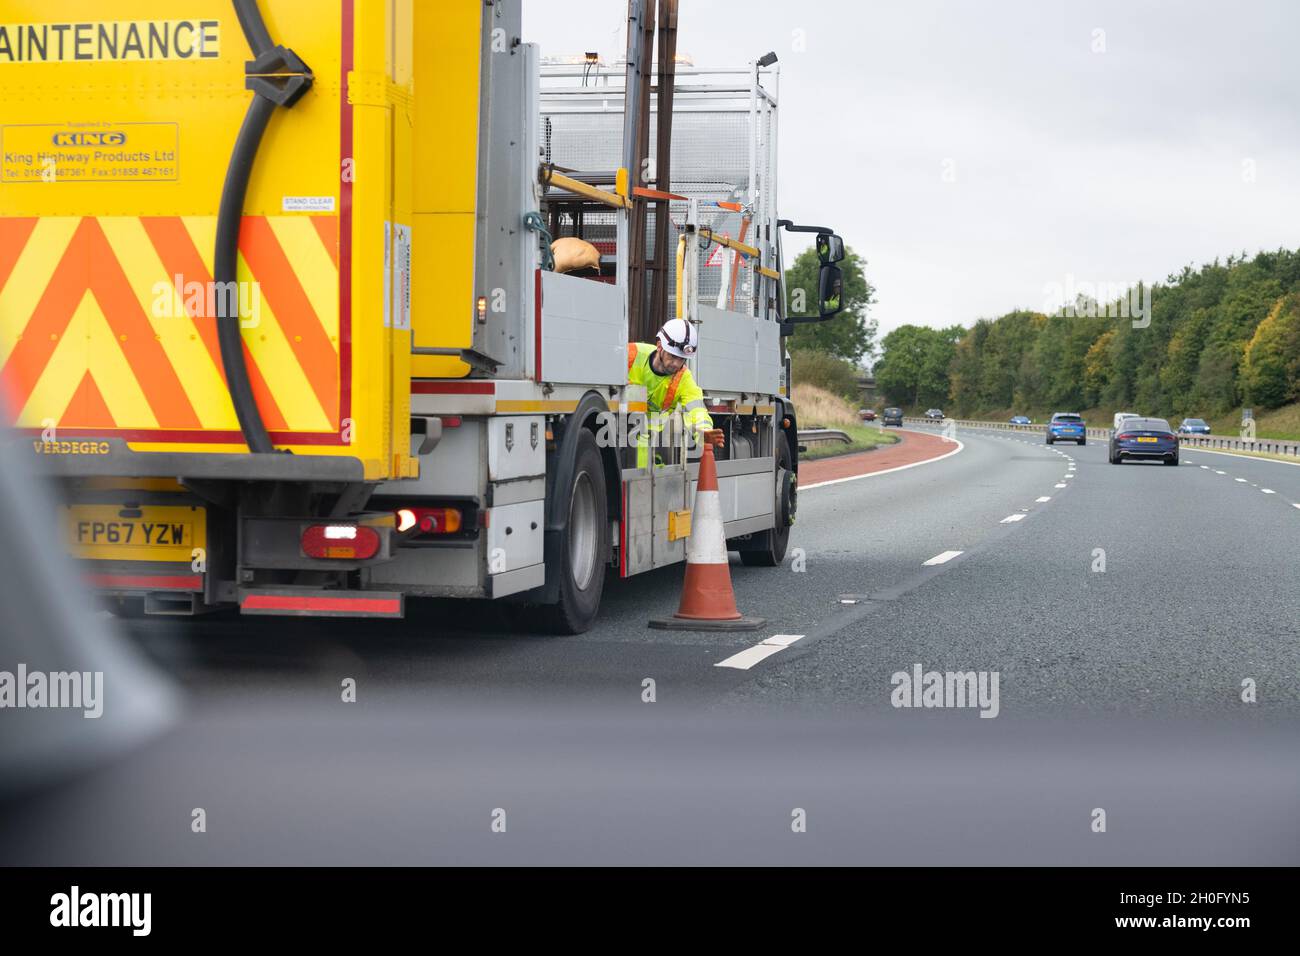 worker collecting traffic cones manually by hand on UK motorway Stock Photo